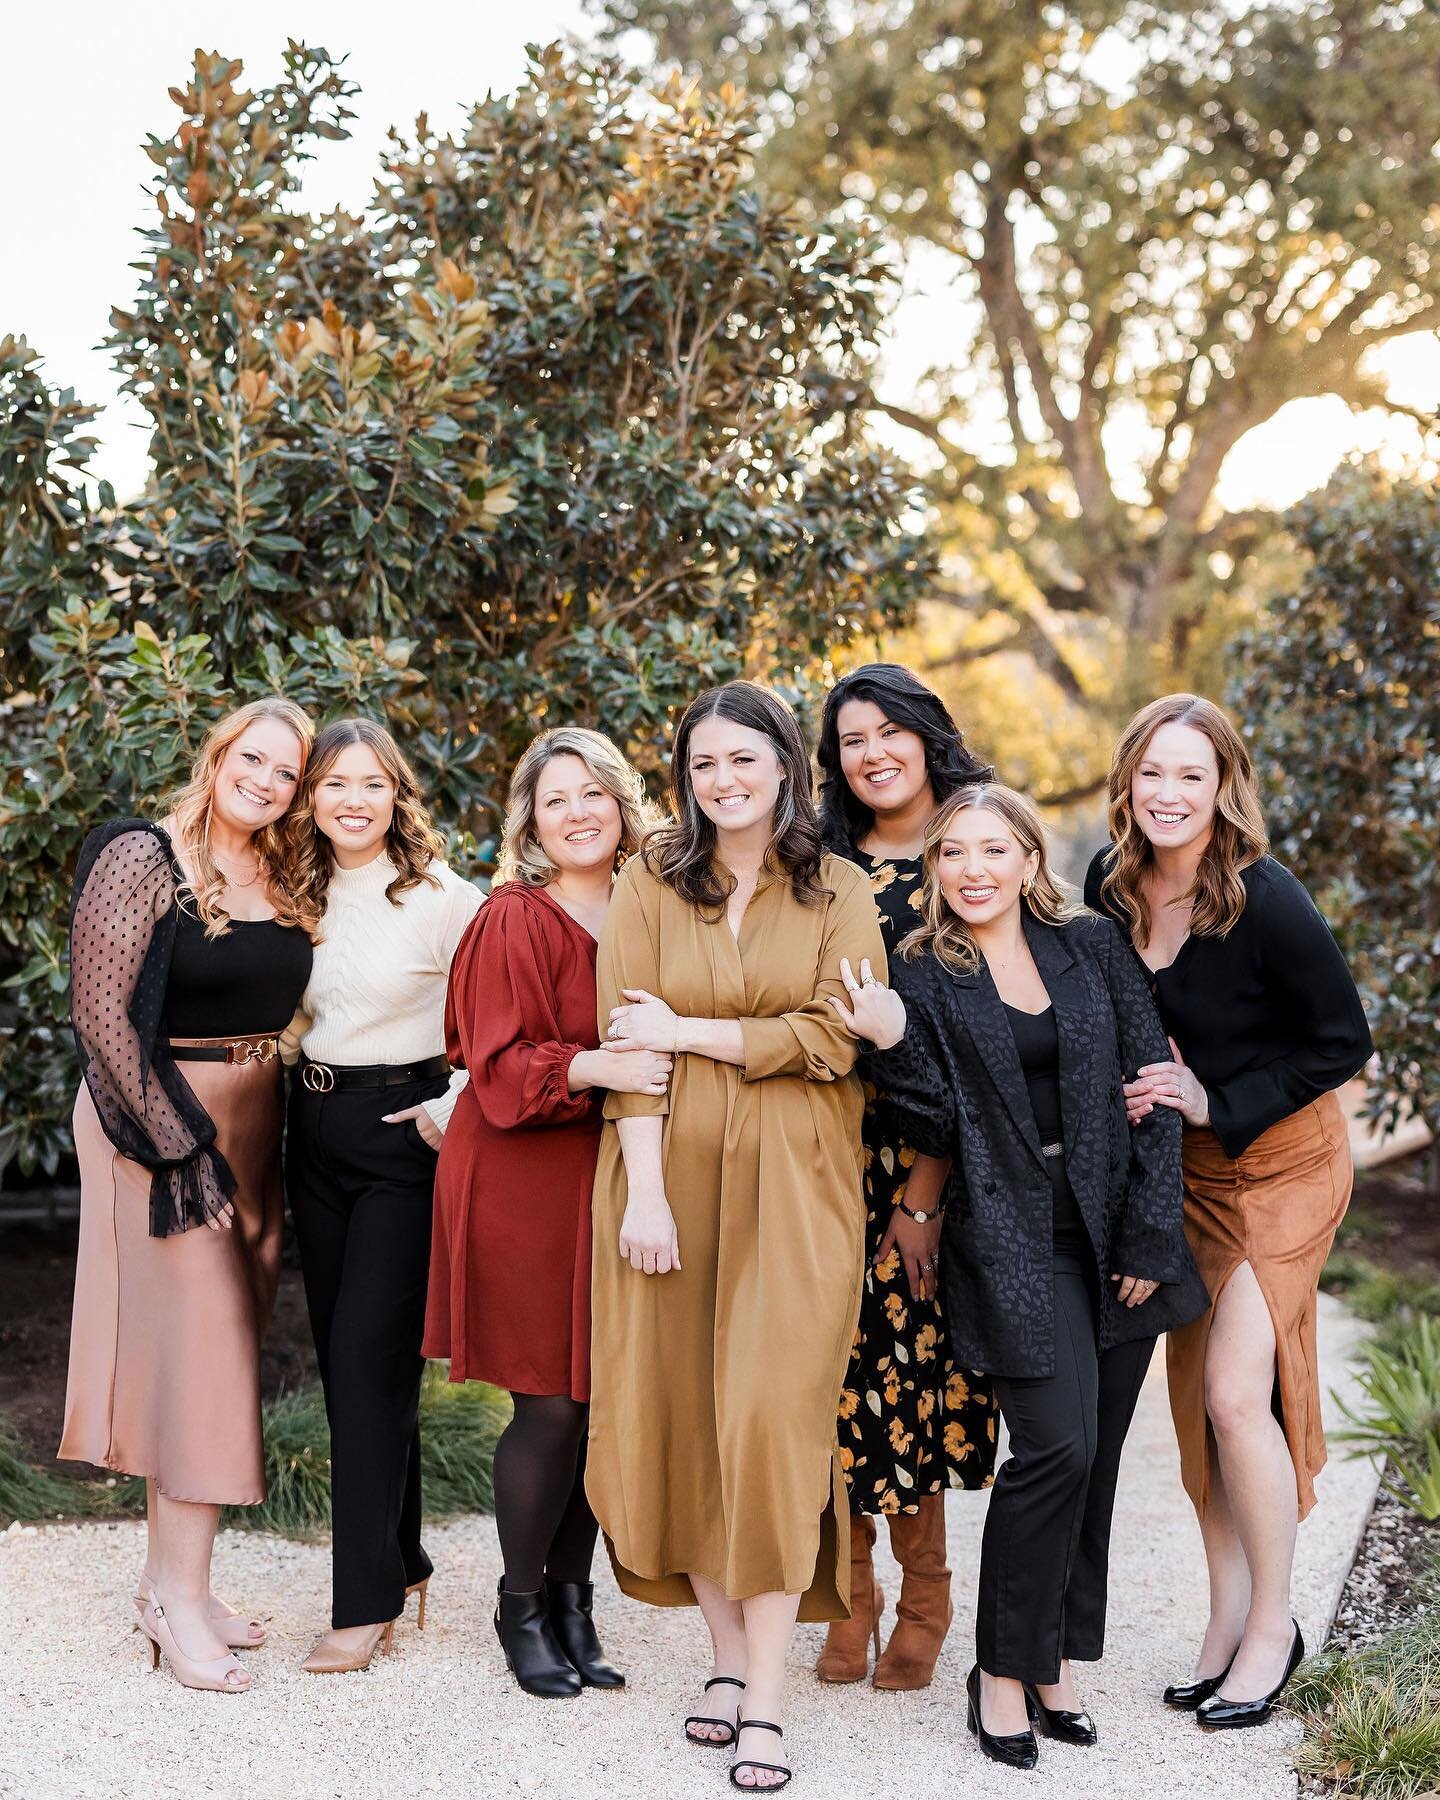 Happy Galentine&rsquo;s day to these amazing ladies - I feel so lucky to have each one of them on my team!  Love having another day to celebrate the amazing women in our lives! 🫶🏻

Photographer @twofishweddings 
Venue @commodoreperryauberge 
MUAH @